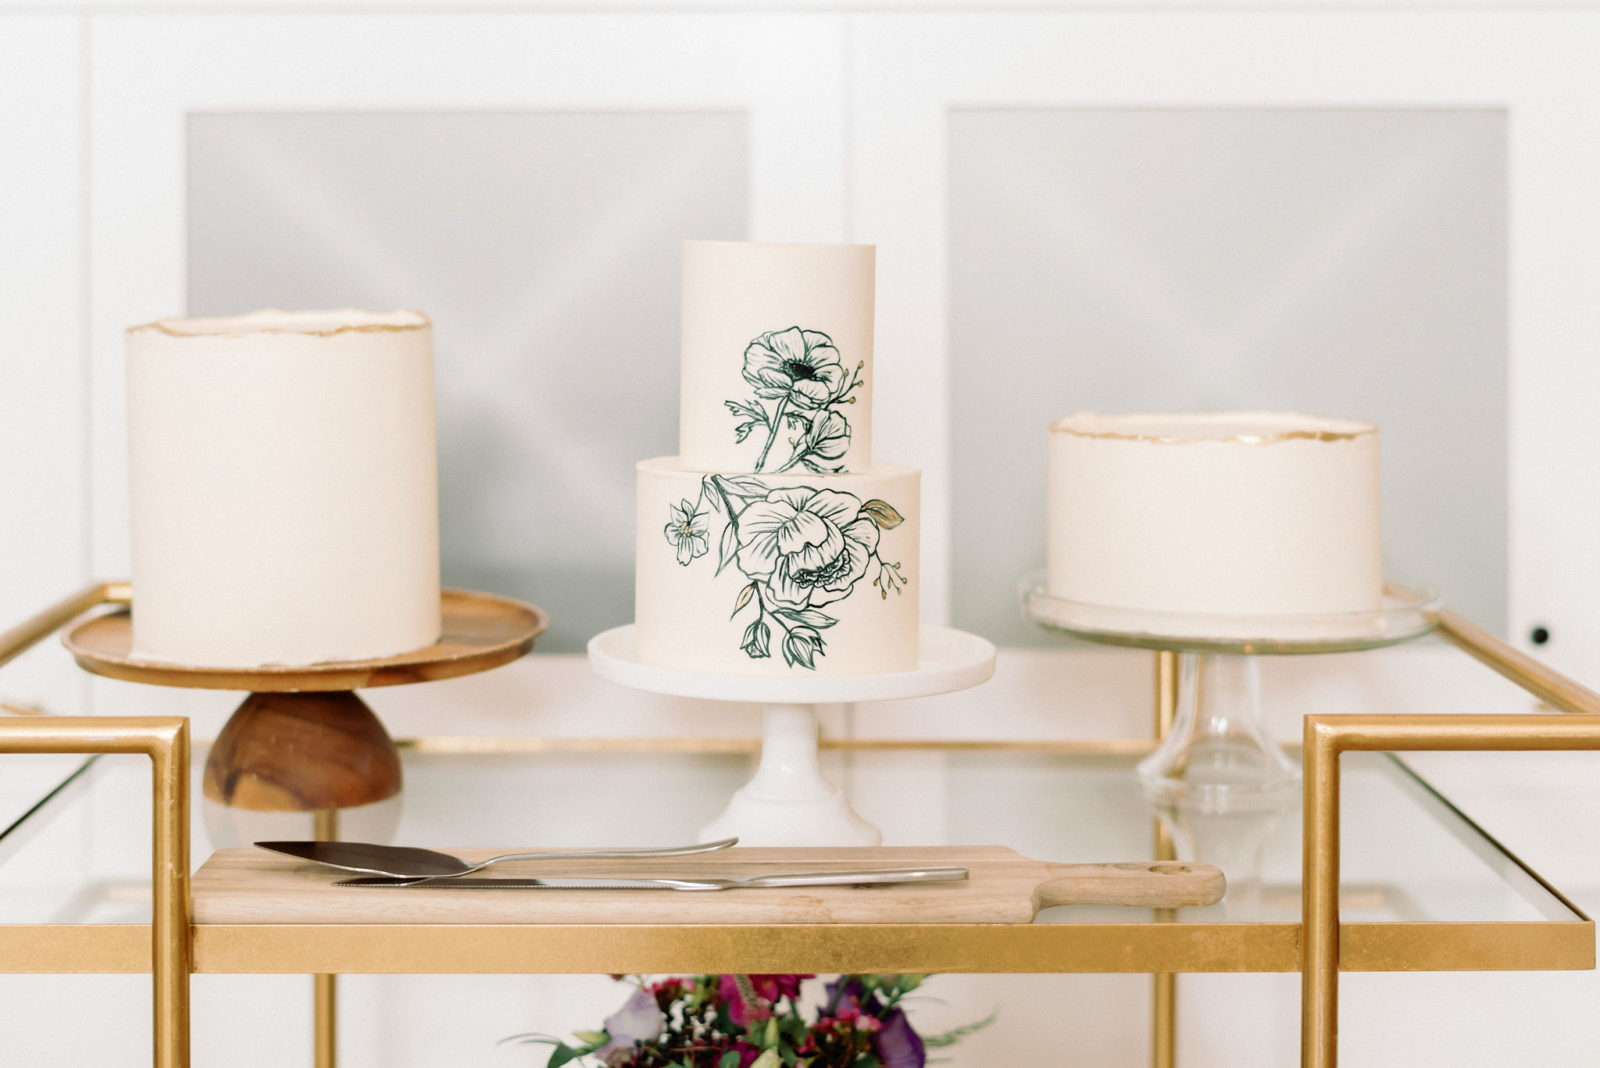 stencilled wedding cake with gold foil, unique wedding cake ideas, wedding cake inspiration